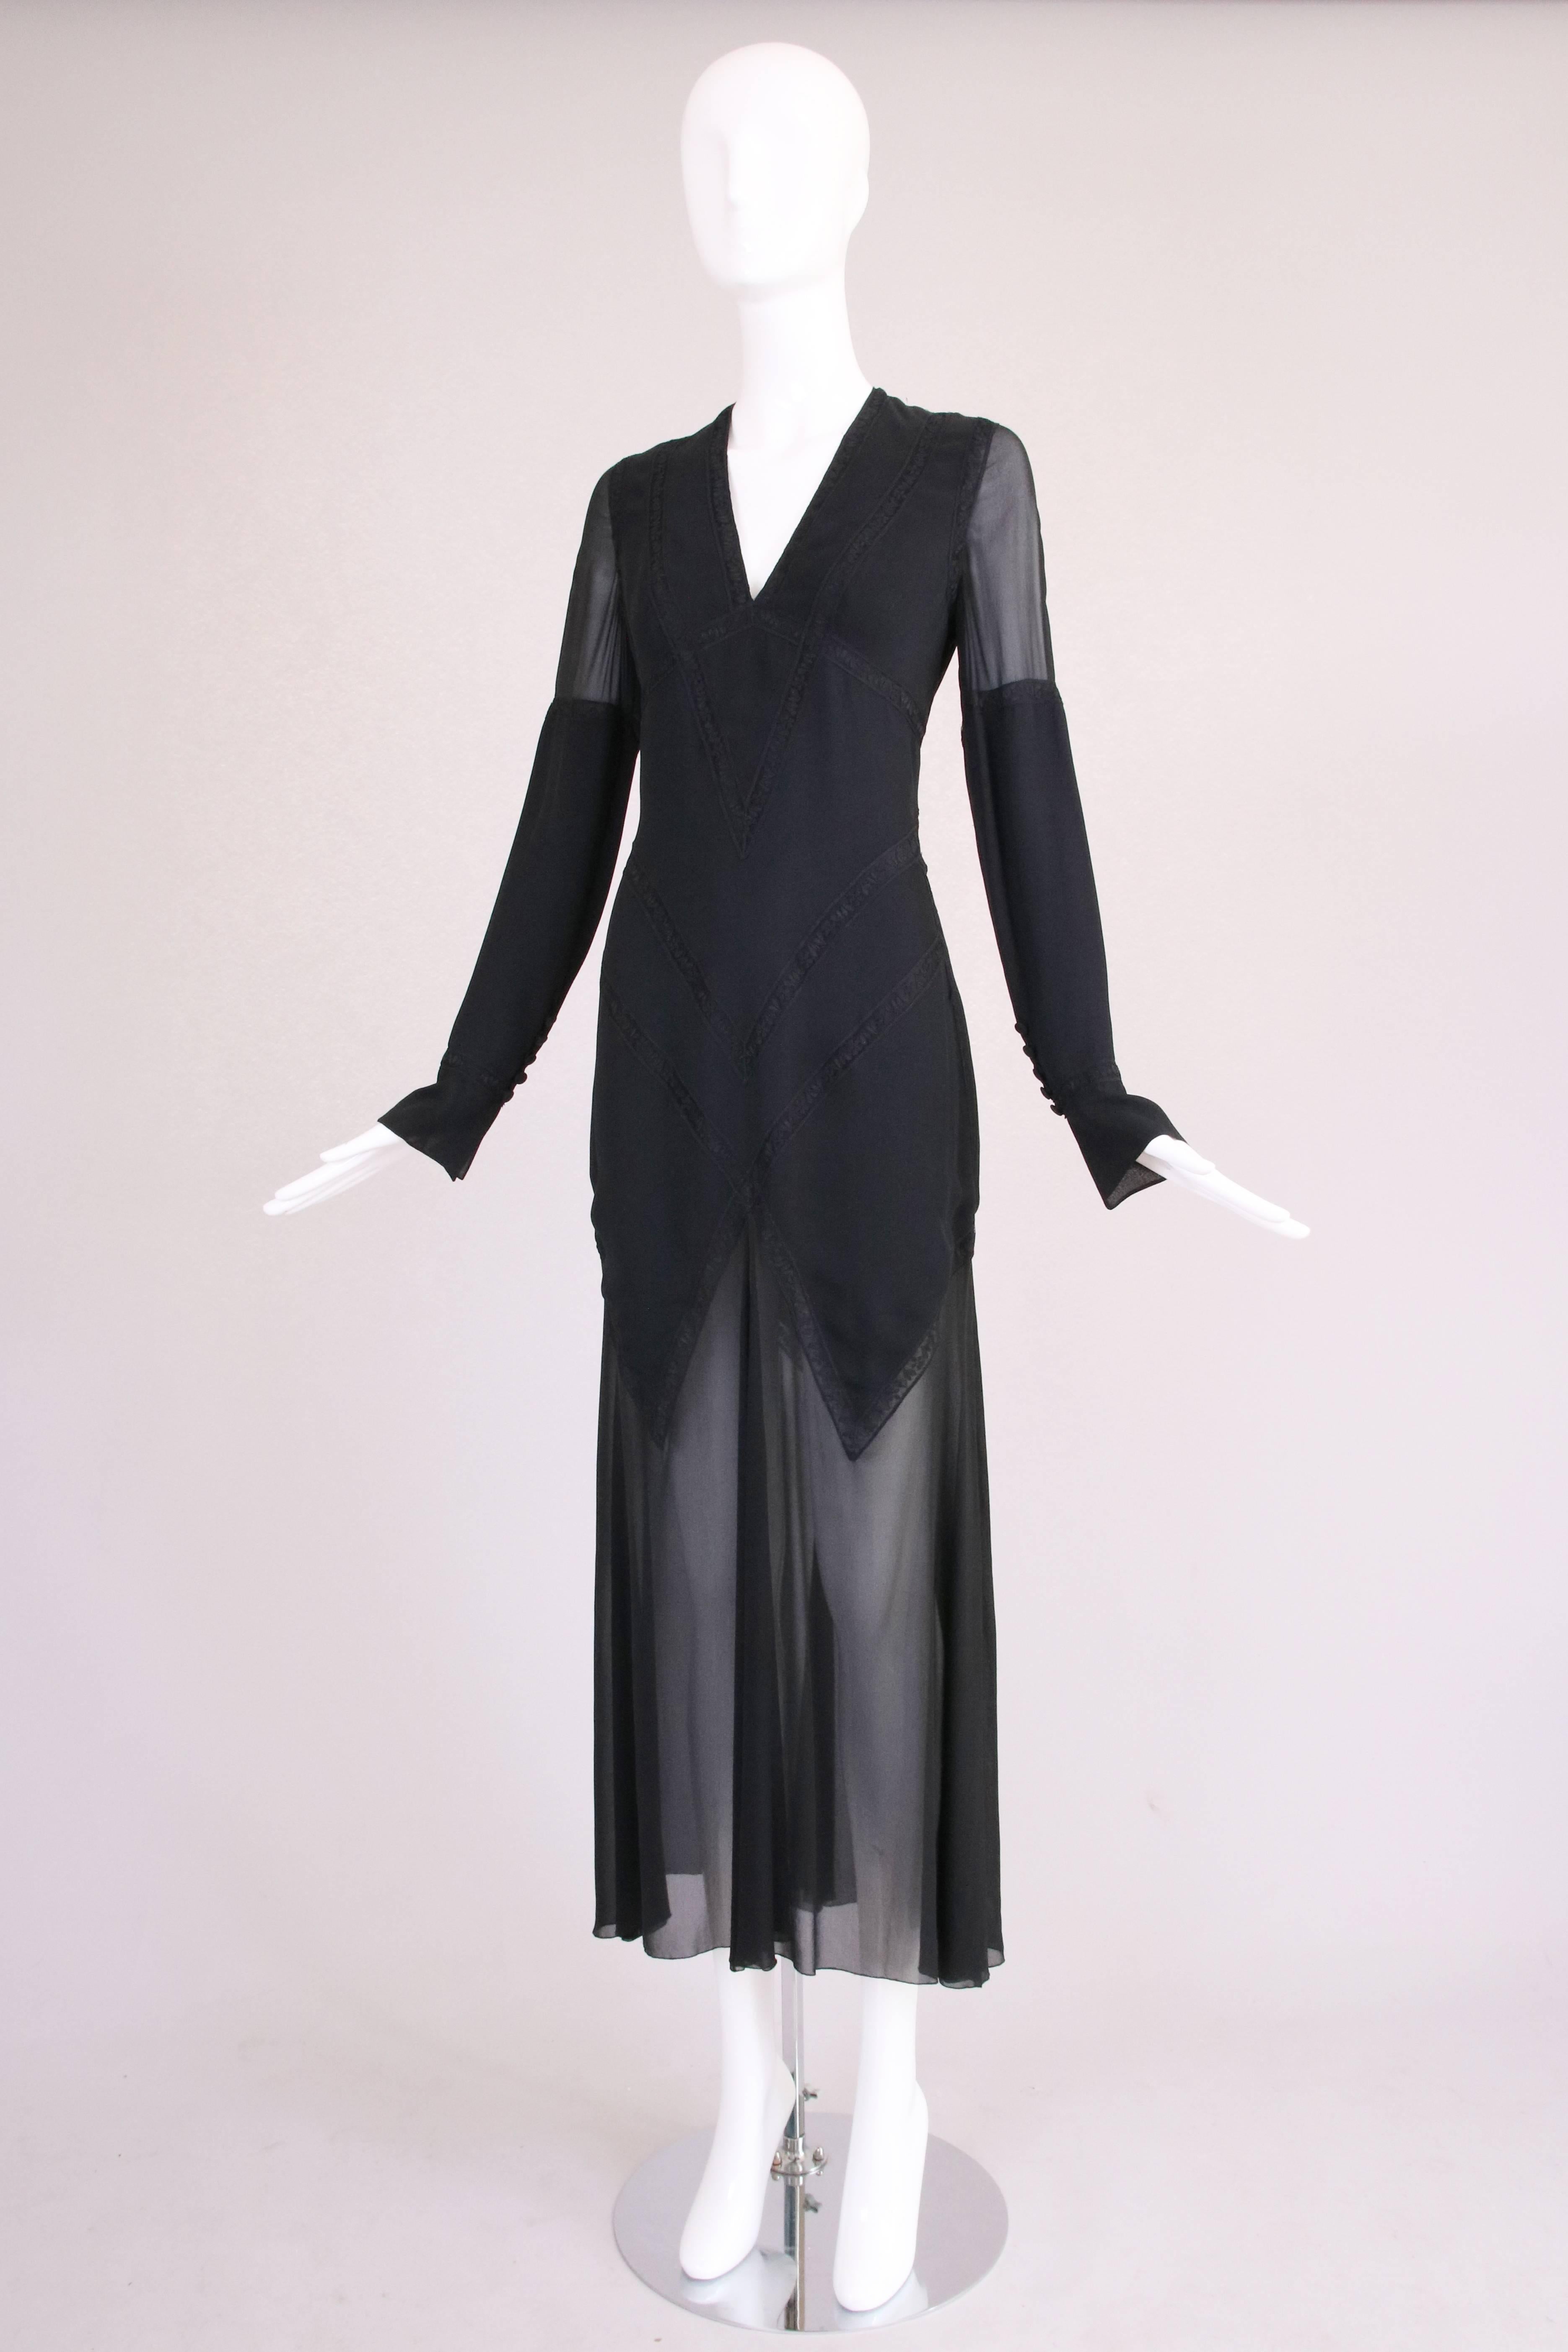 1980’s Karl Lagerfeld long-sleeved black silk evening dress with transparent chiffon lower skirt and upper arms, diagonal lace insets, deep v-neck and deep keyhole opening at the back and button closure at the lower back. Size tag